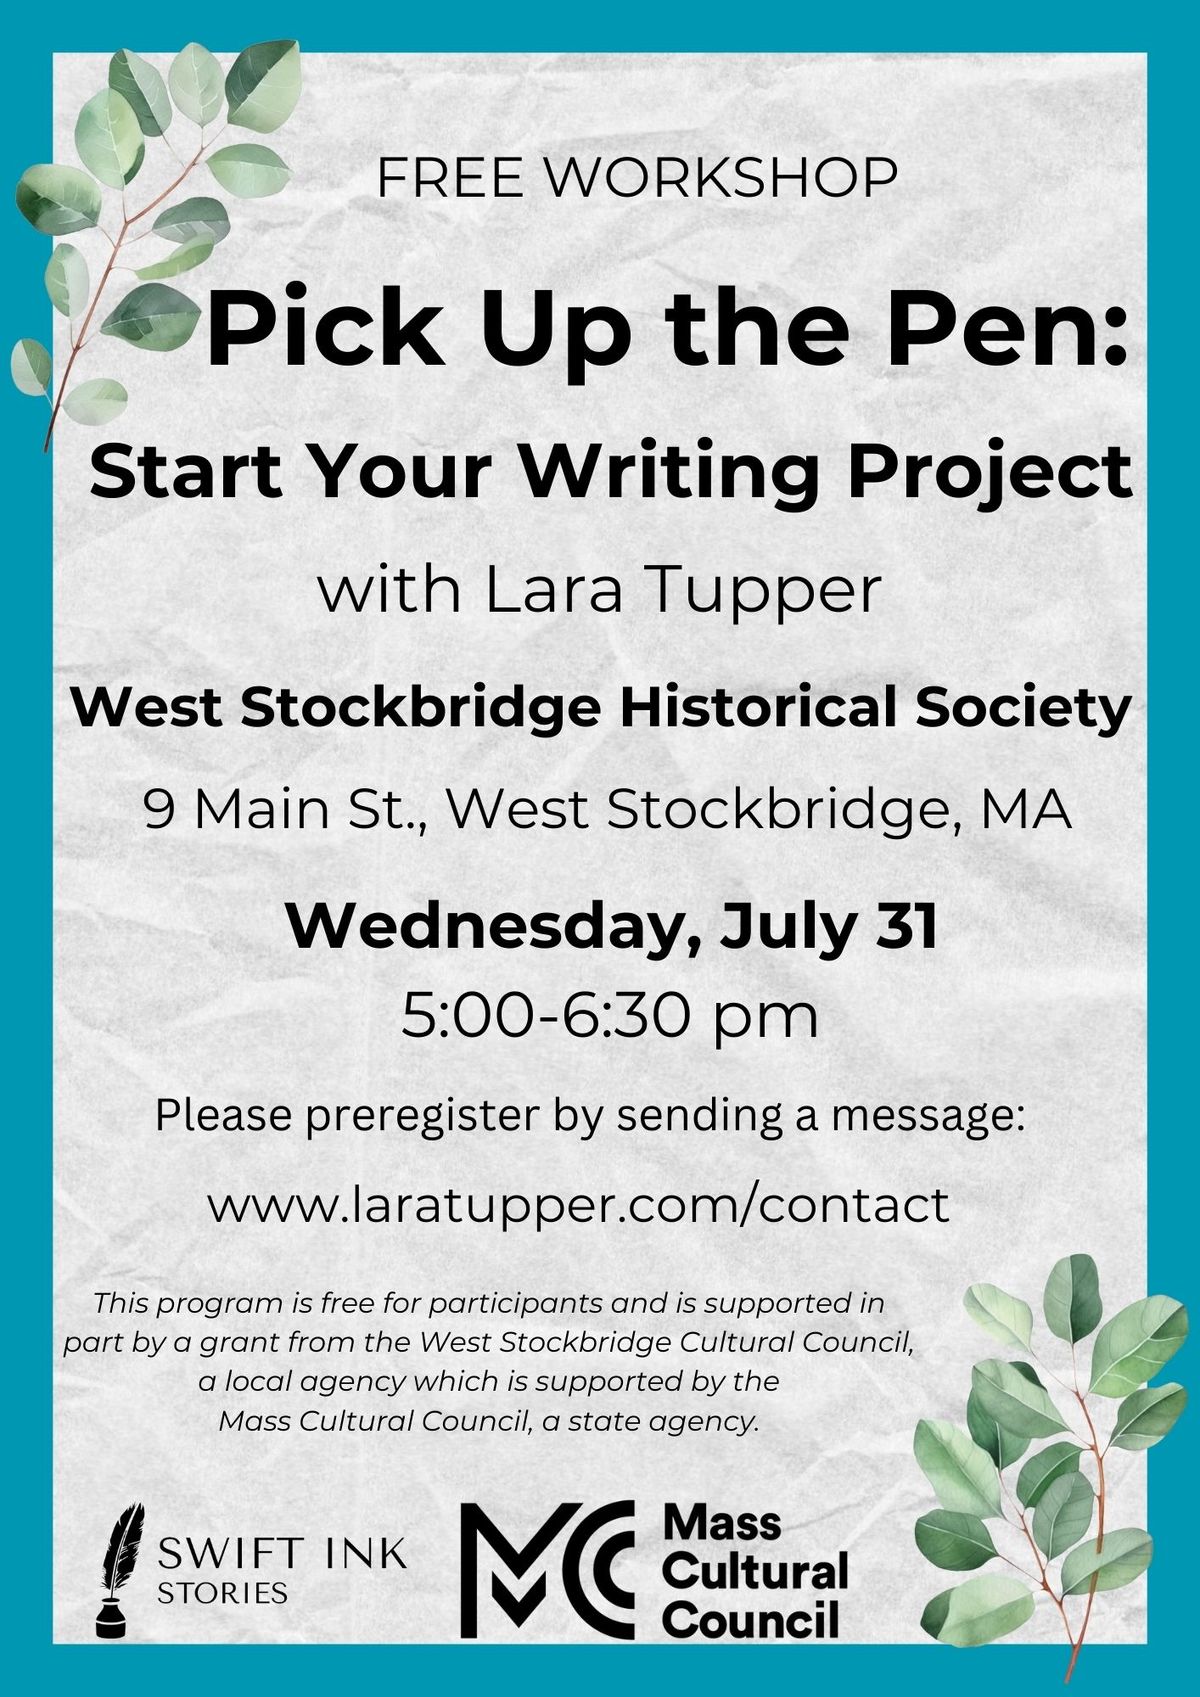 Pick Up the Pen: Start Your Writing Project with Lara Tupper